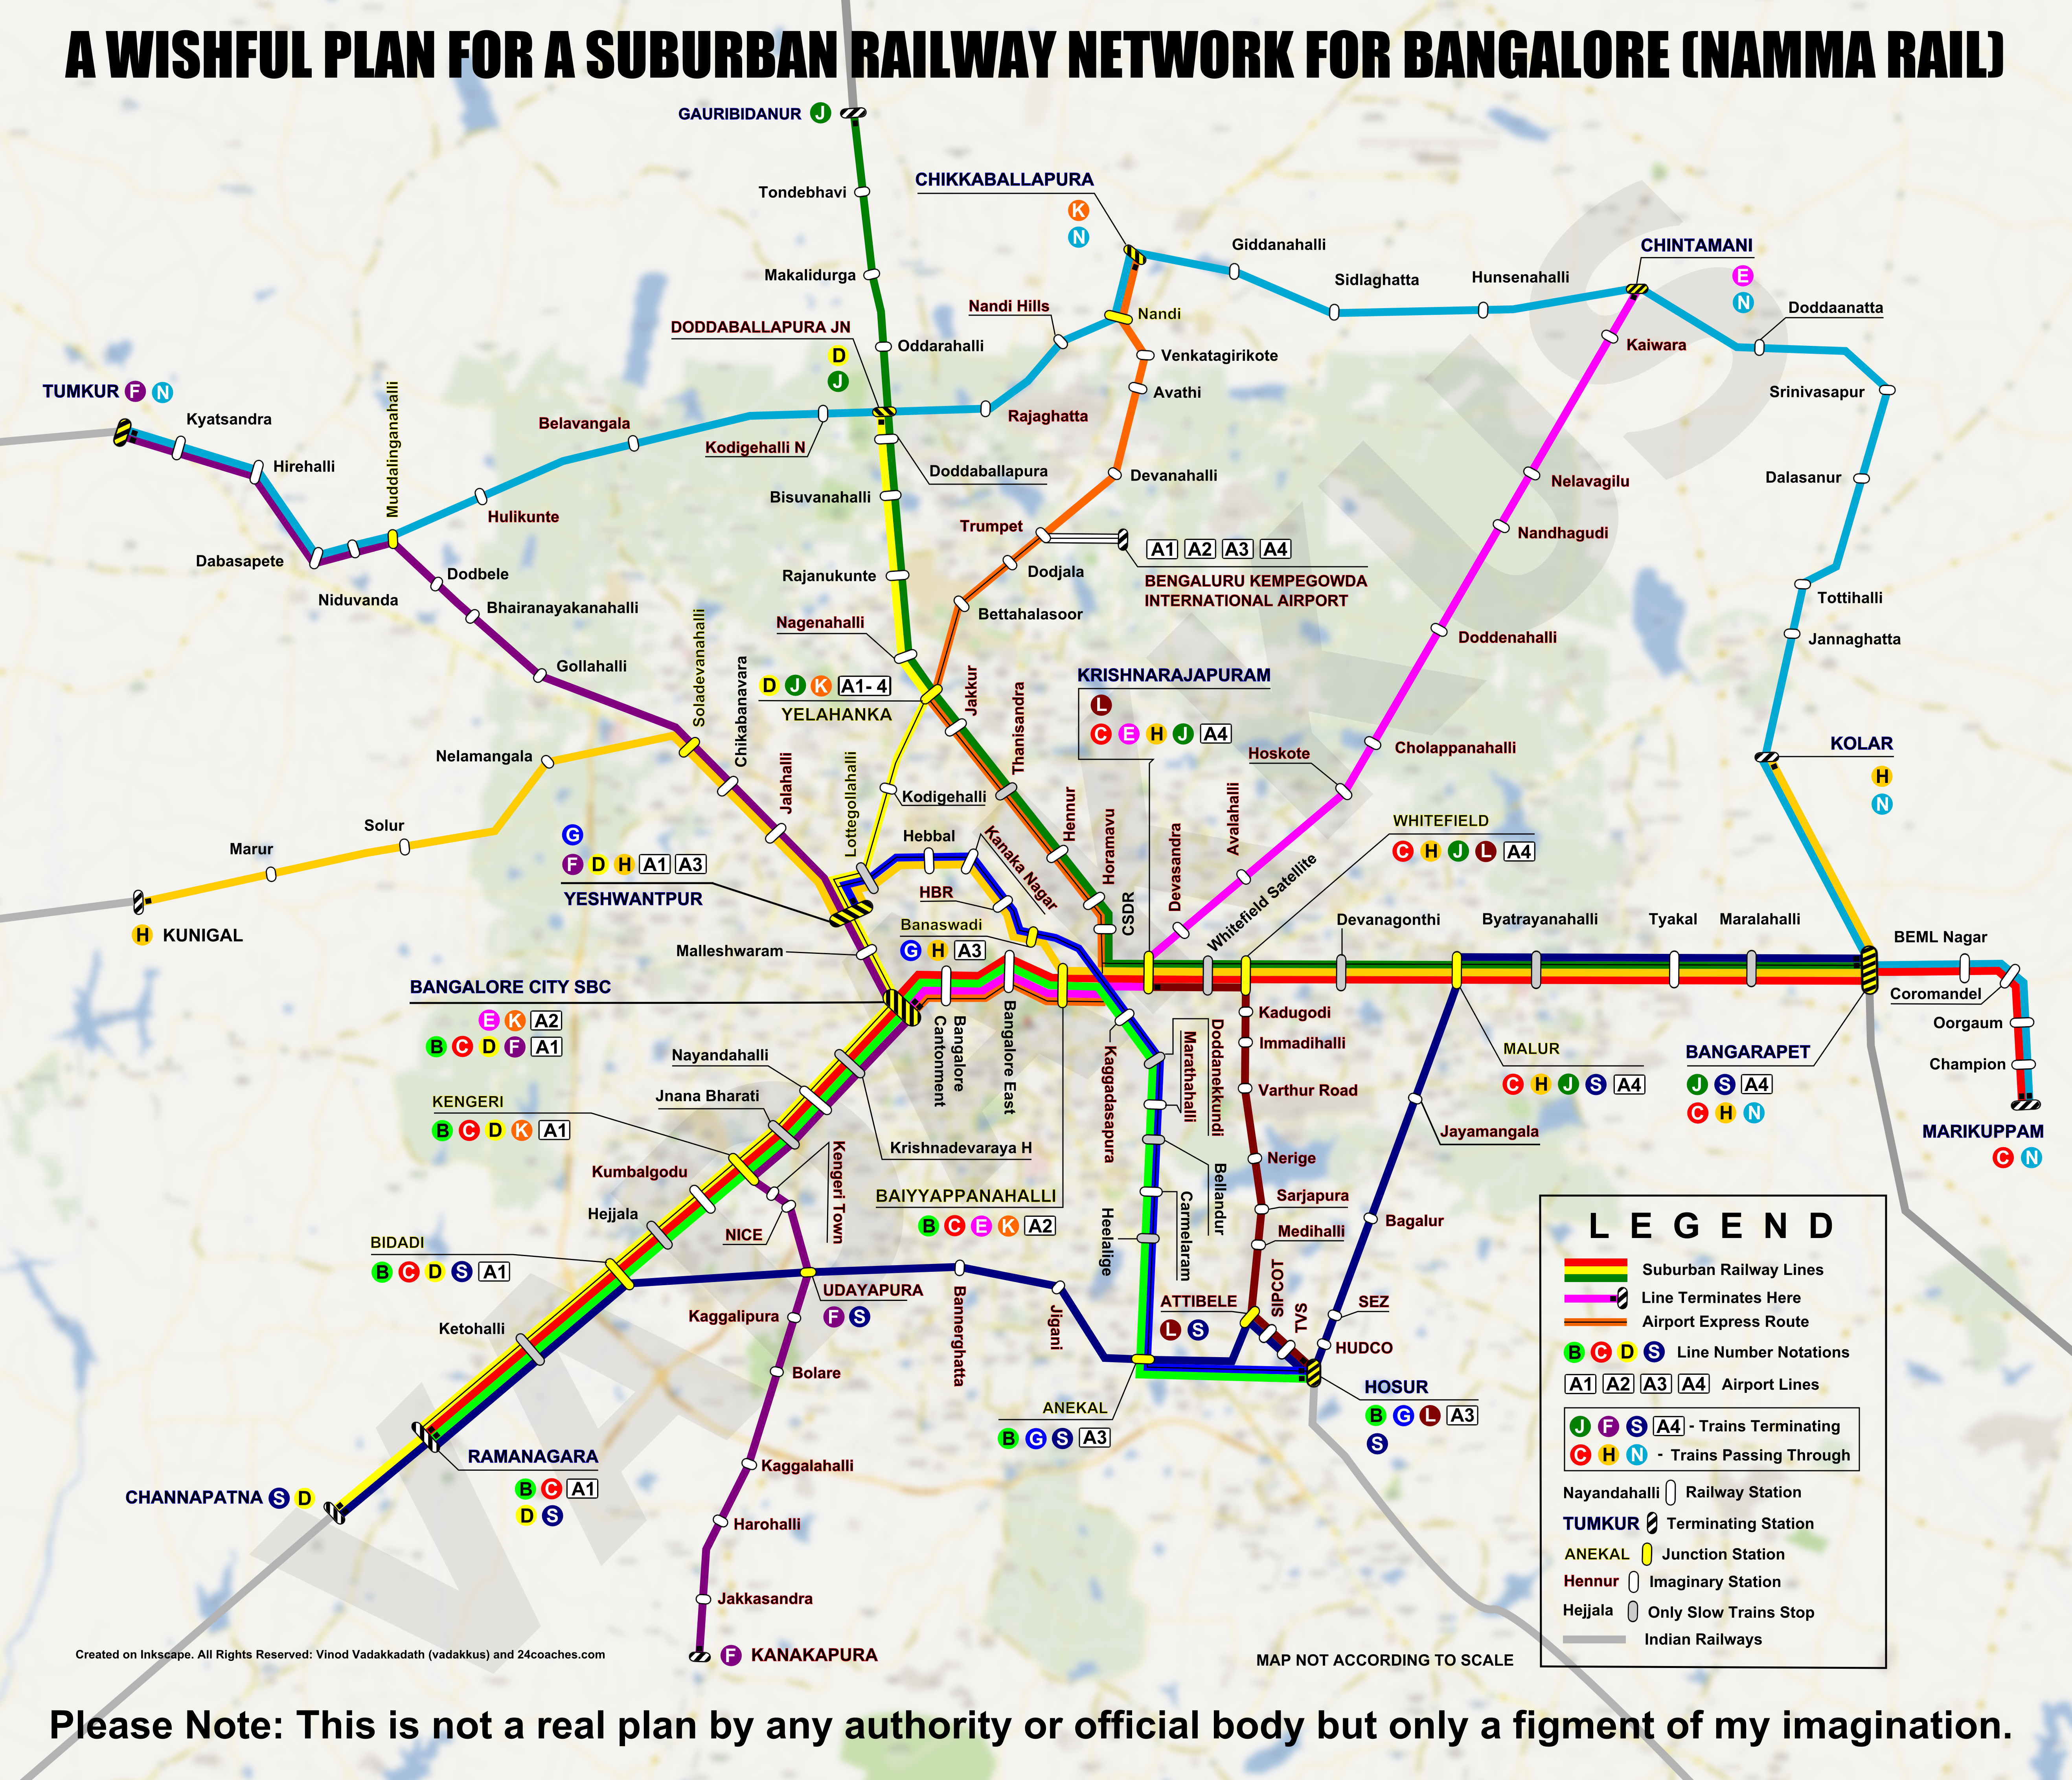 A suburban railway network transit plan map for Bangalore: Imaginary Proposal for 